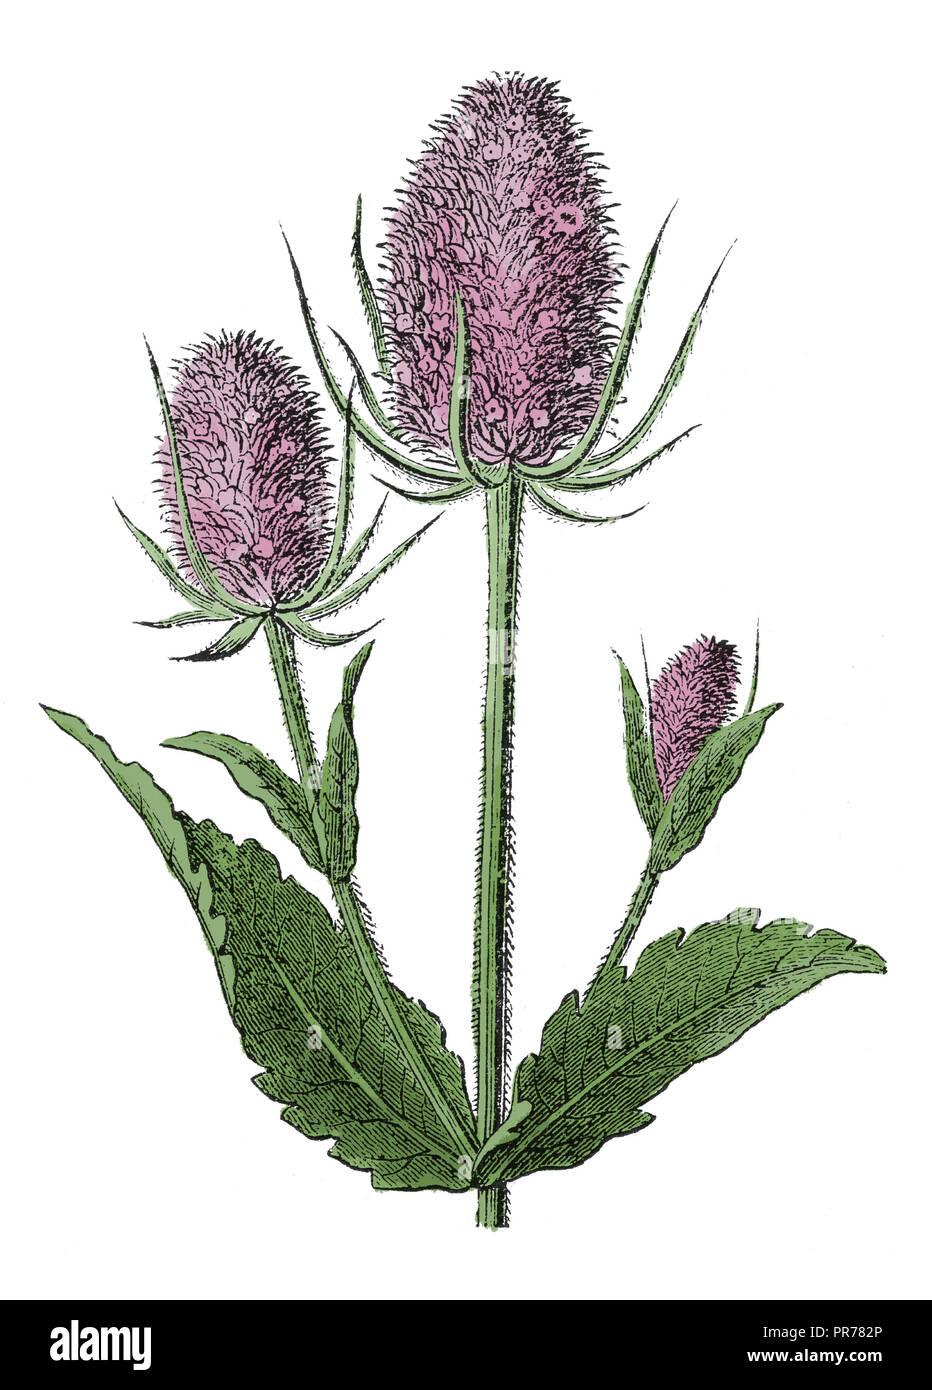 19th century illustration of Dipsacus fullonum, syn. Dipsacus sylvestris, is a species of flowering plant known by the common names Fuller's teasel an Stock Photo